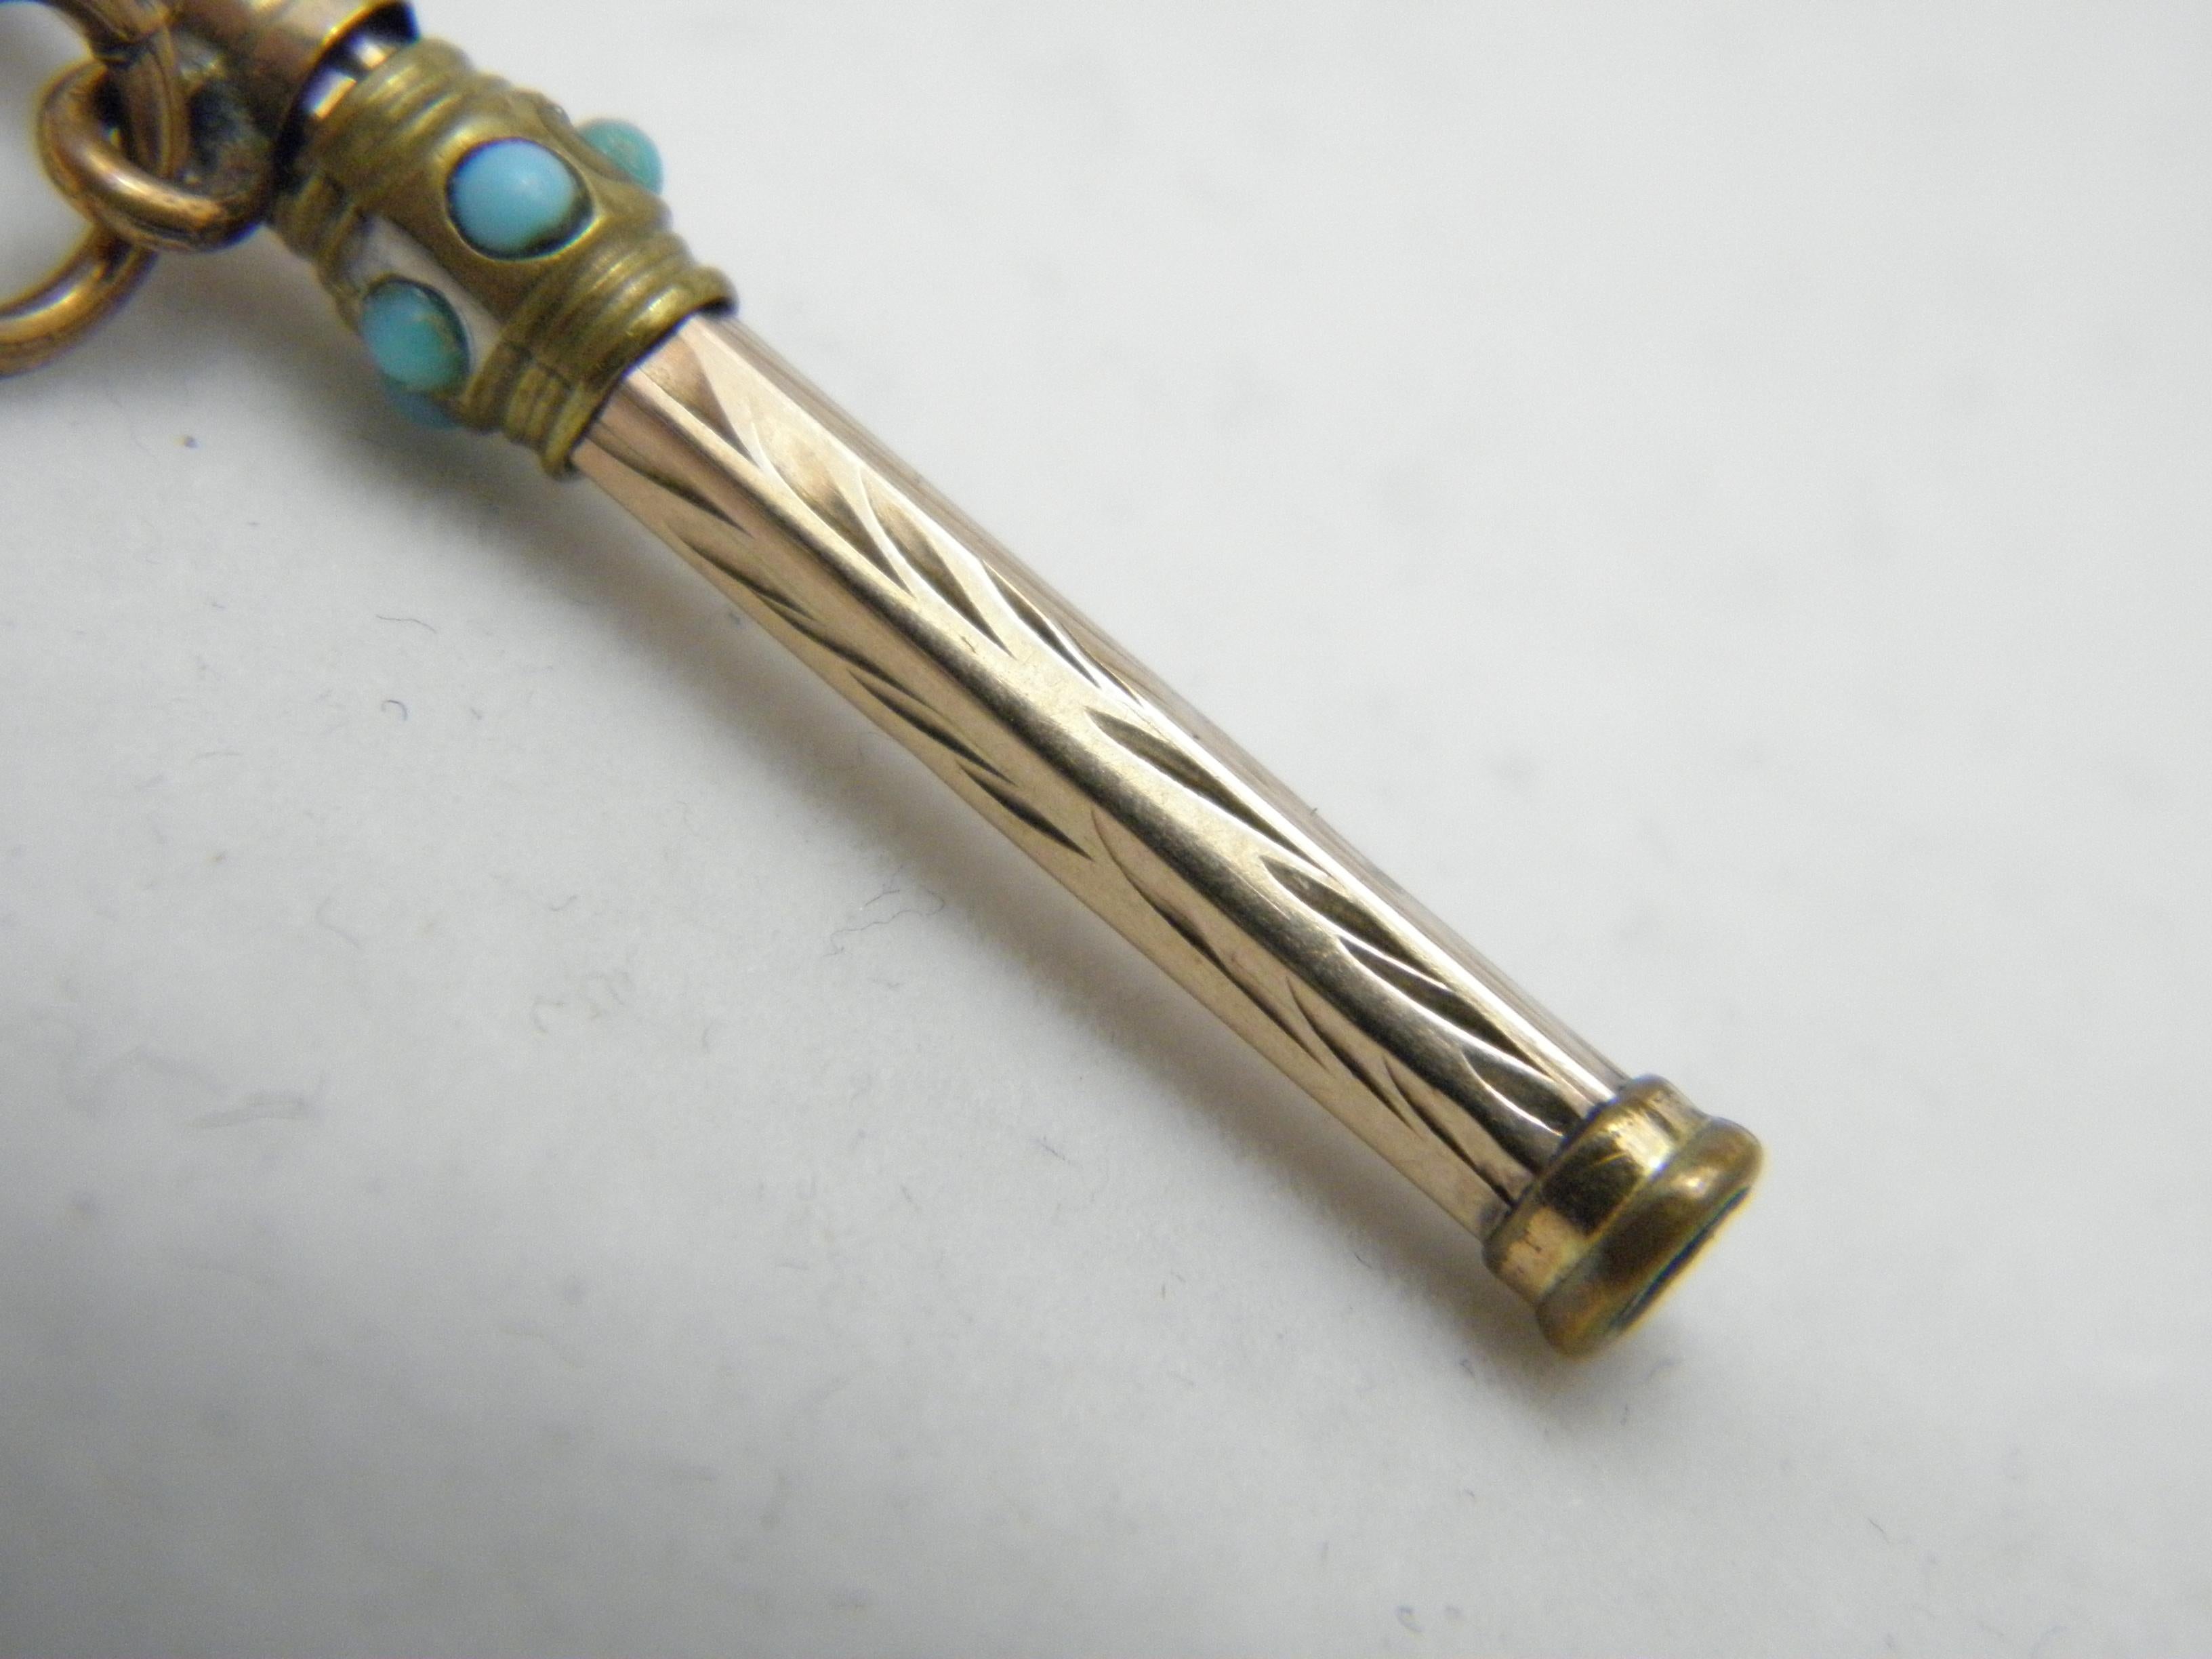 Cabochon Antique 9ct Gold Larimar Turquoise Toothpick Fob c1820 375 Purity Chatelaine